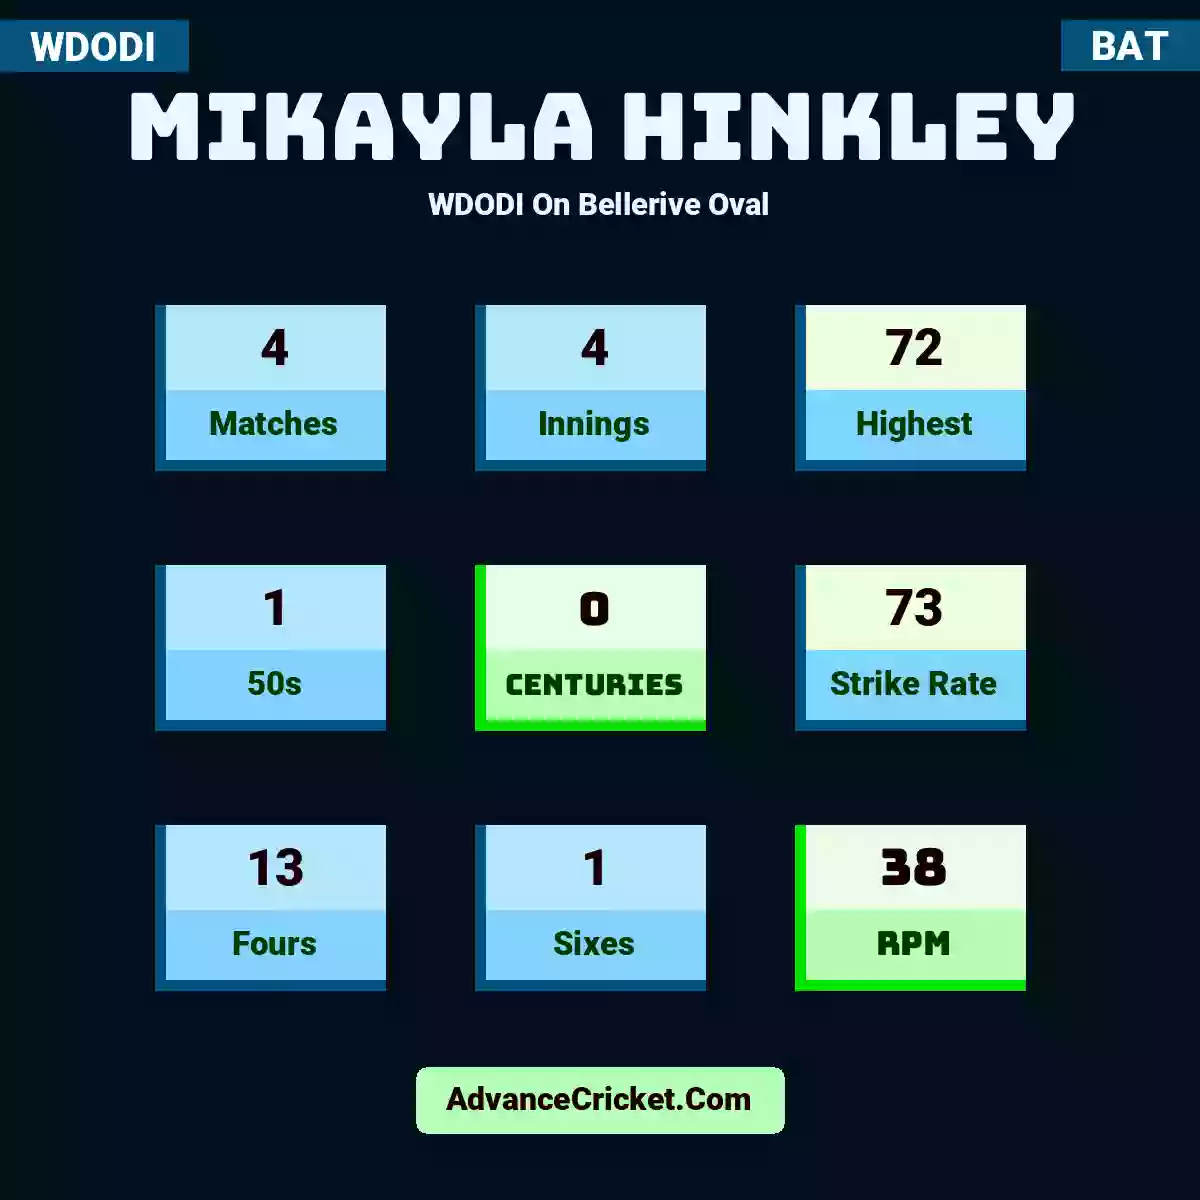 Mikayla Hinkley WDODI  On Bellerive Oval, Mikayla Hinkley played 4 matches, scored 72 runs as highest, 1 half-centuries, and 0 centuries, with a strike rate of 73. M.Hinkley hit 13 fours and 1 sixes, with an RPM of 38.